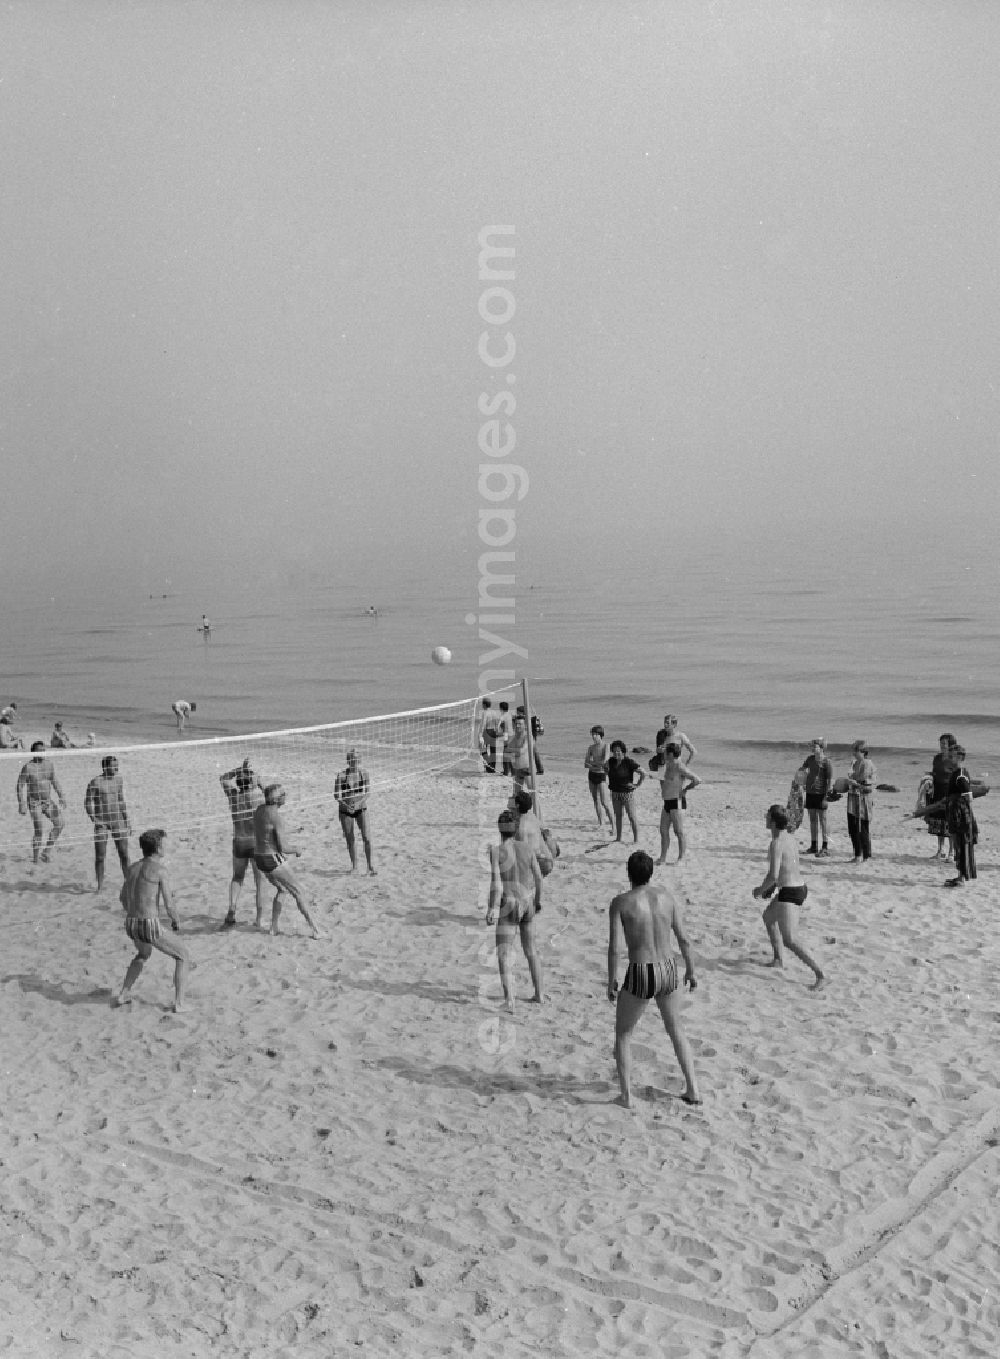 GDR photo archive: Ückeritz - Tourists play on the beach in Ueckeritz on the Baltic volleyball in the state of Mecklenburg-Western Pomerania in the field of the former GDR, German Democratic Republic